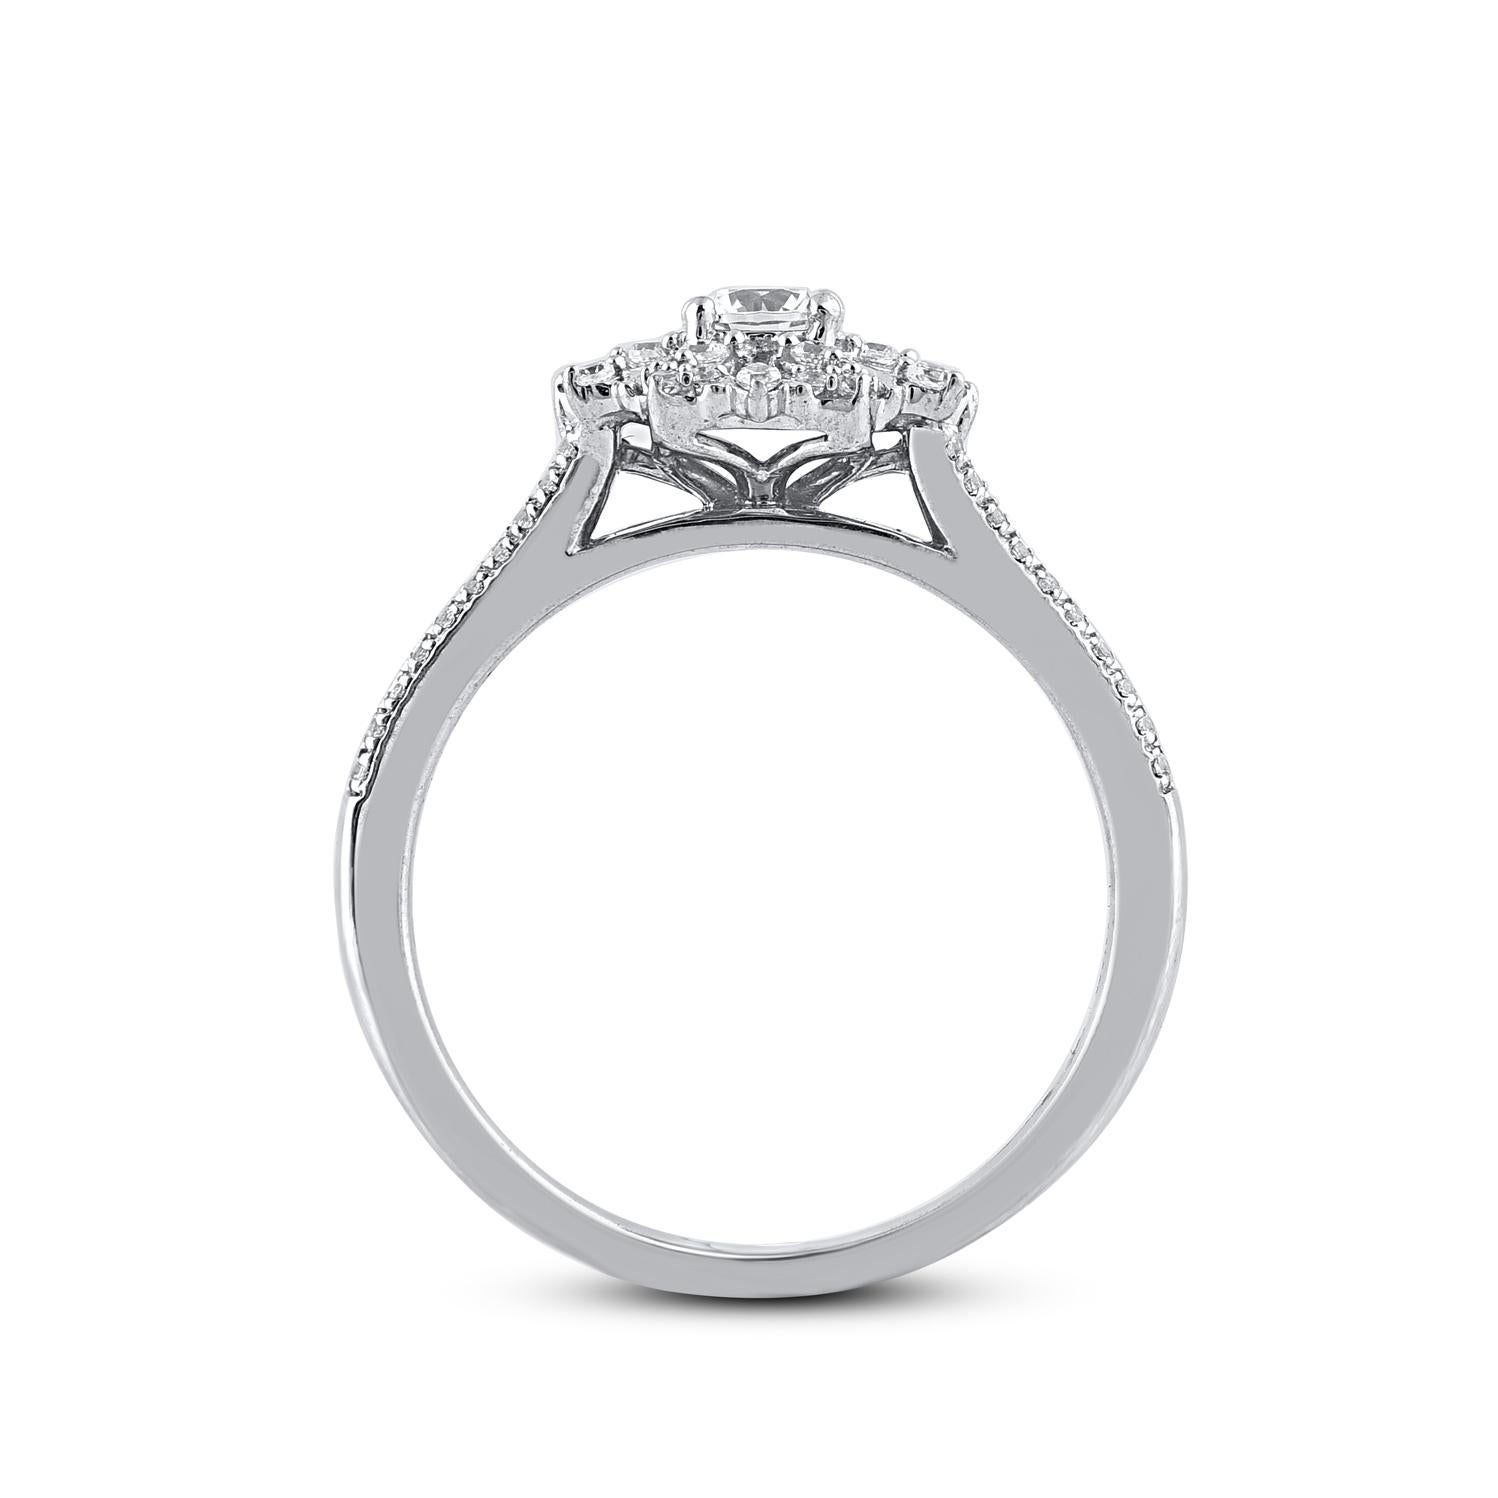 TJD 0.50 Carat Round Diamond 14 Karat White Gold Flower Engagement Ring In New Condition For Sale In New York, NY